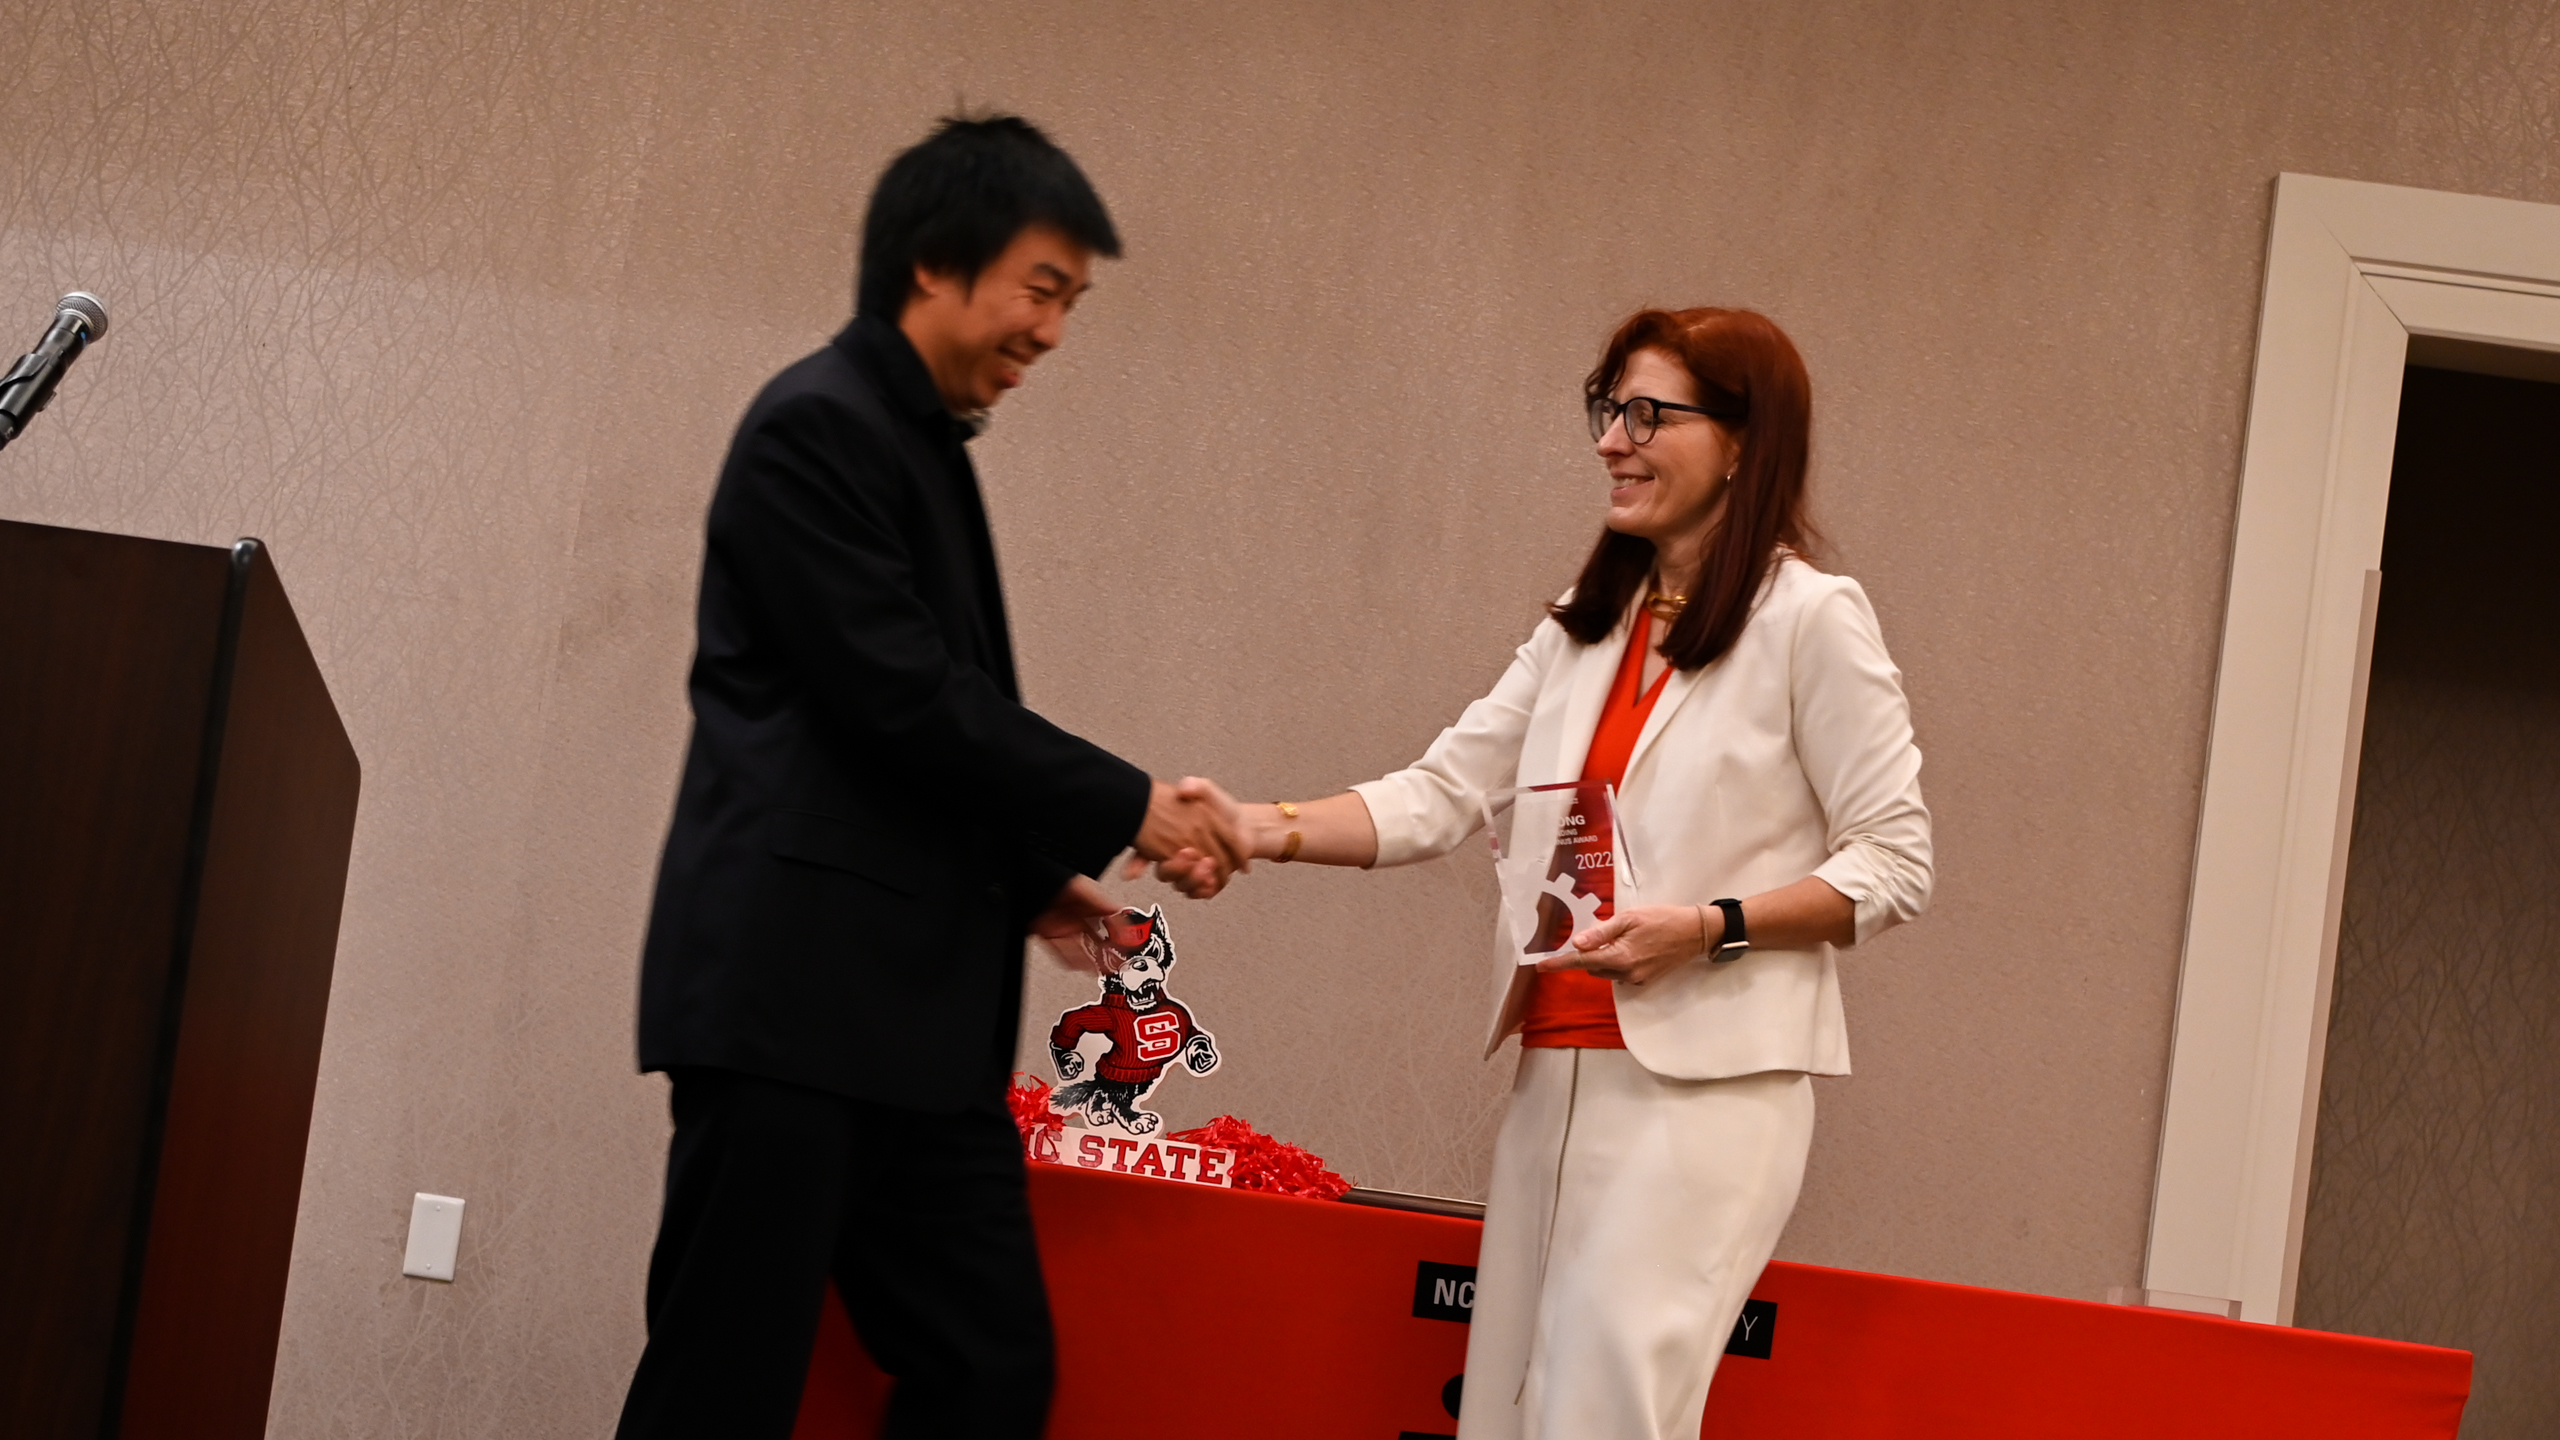 Outstanding Young Alumnus Dr. Tao Hong shaking hands with Dr. Julie Swann